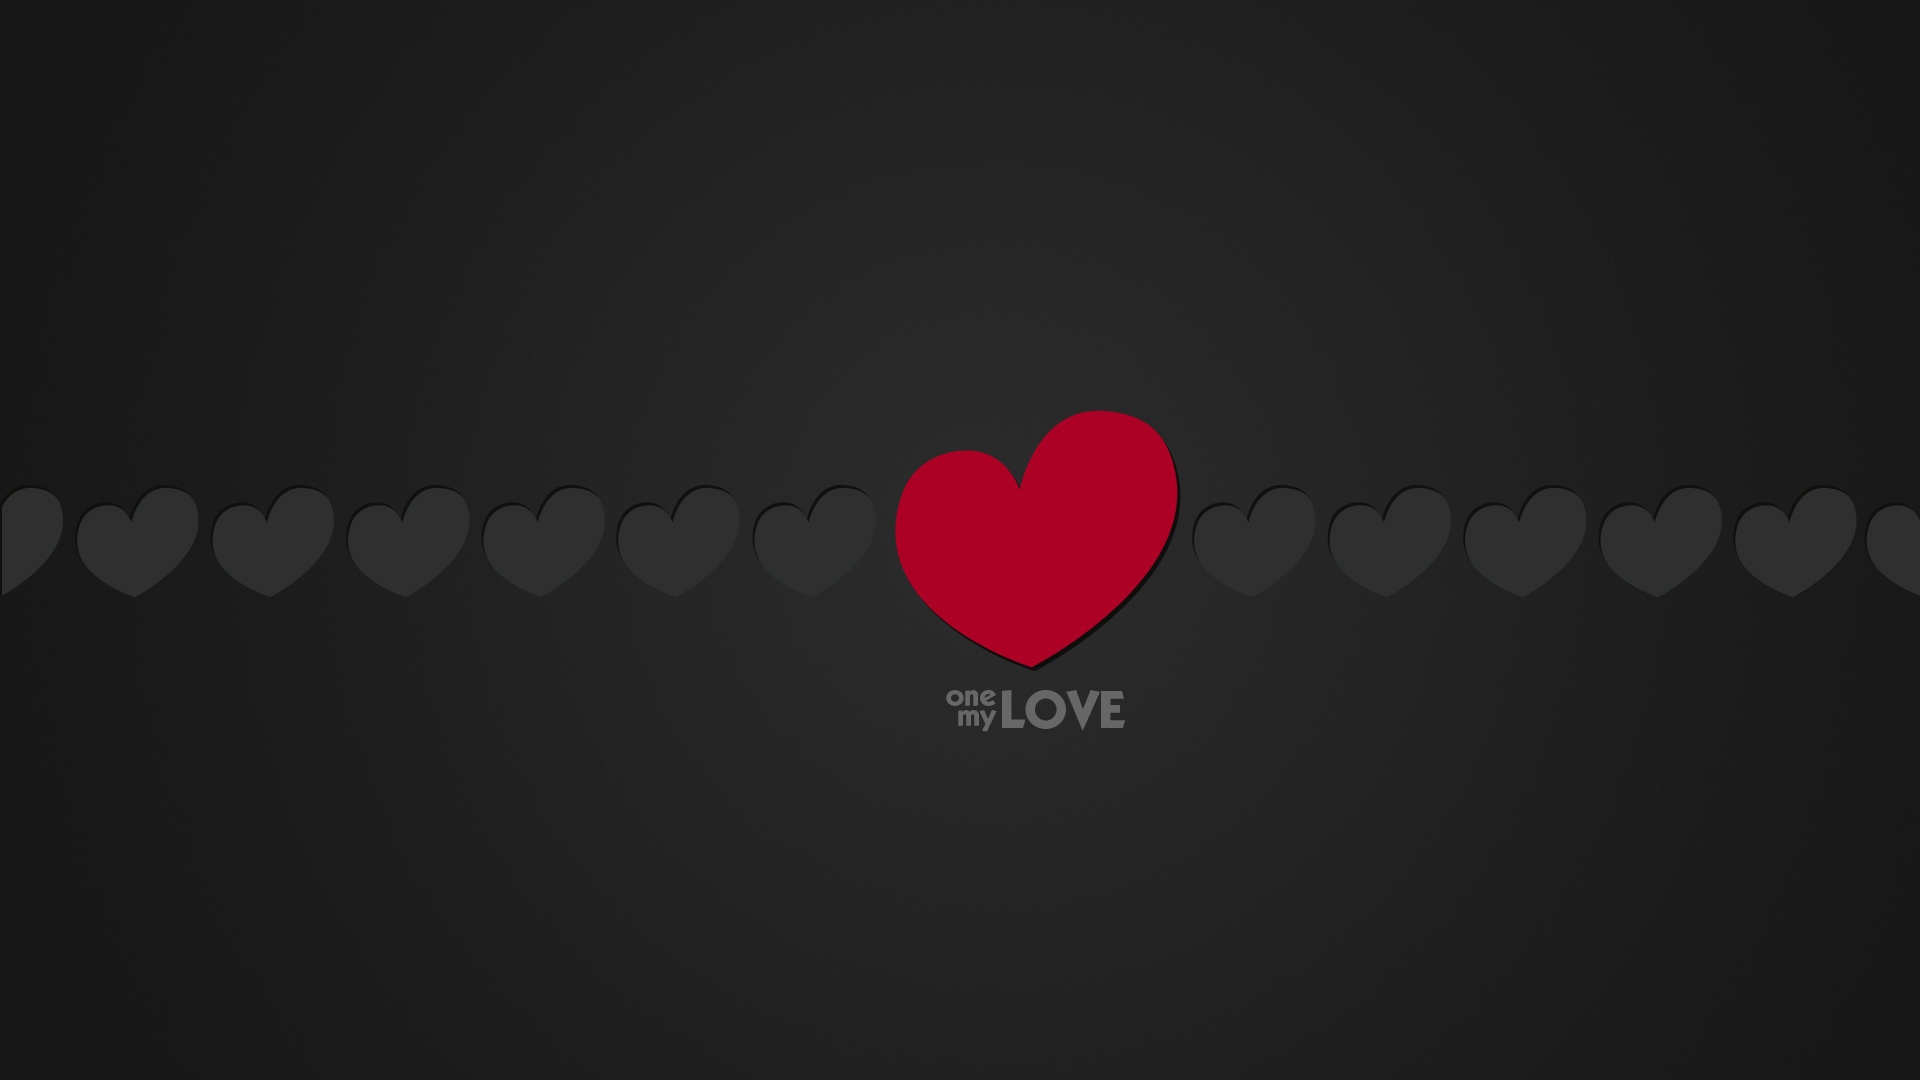 One My Love Wallpapers 1920x1080